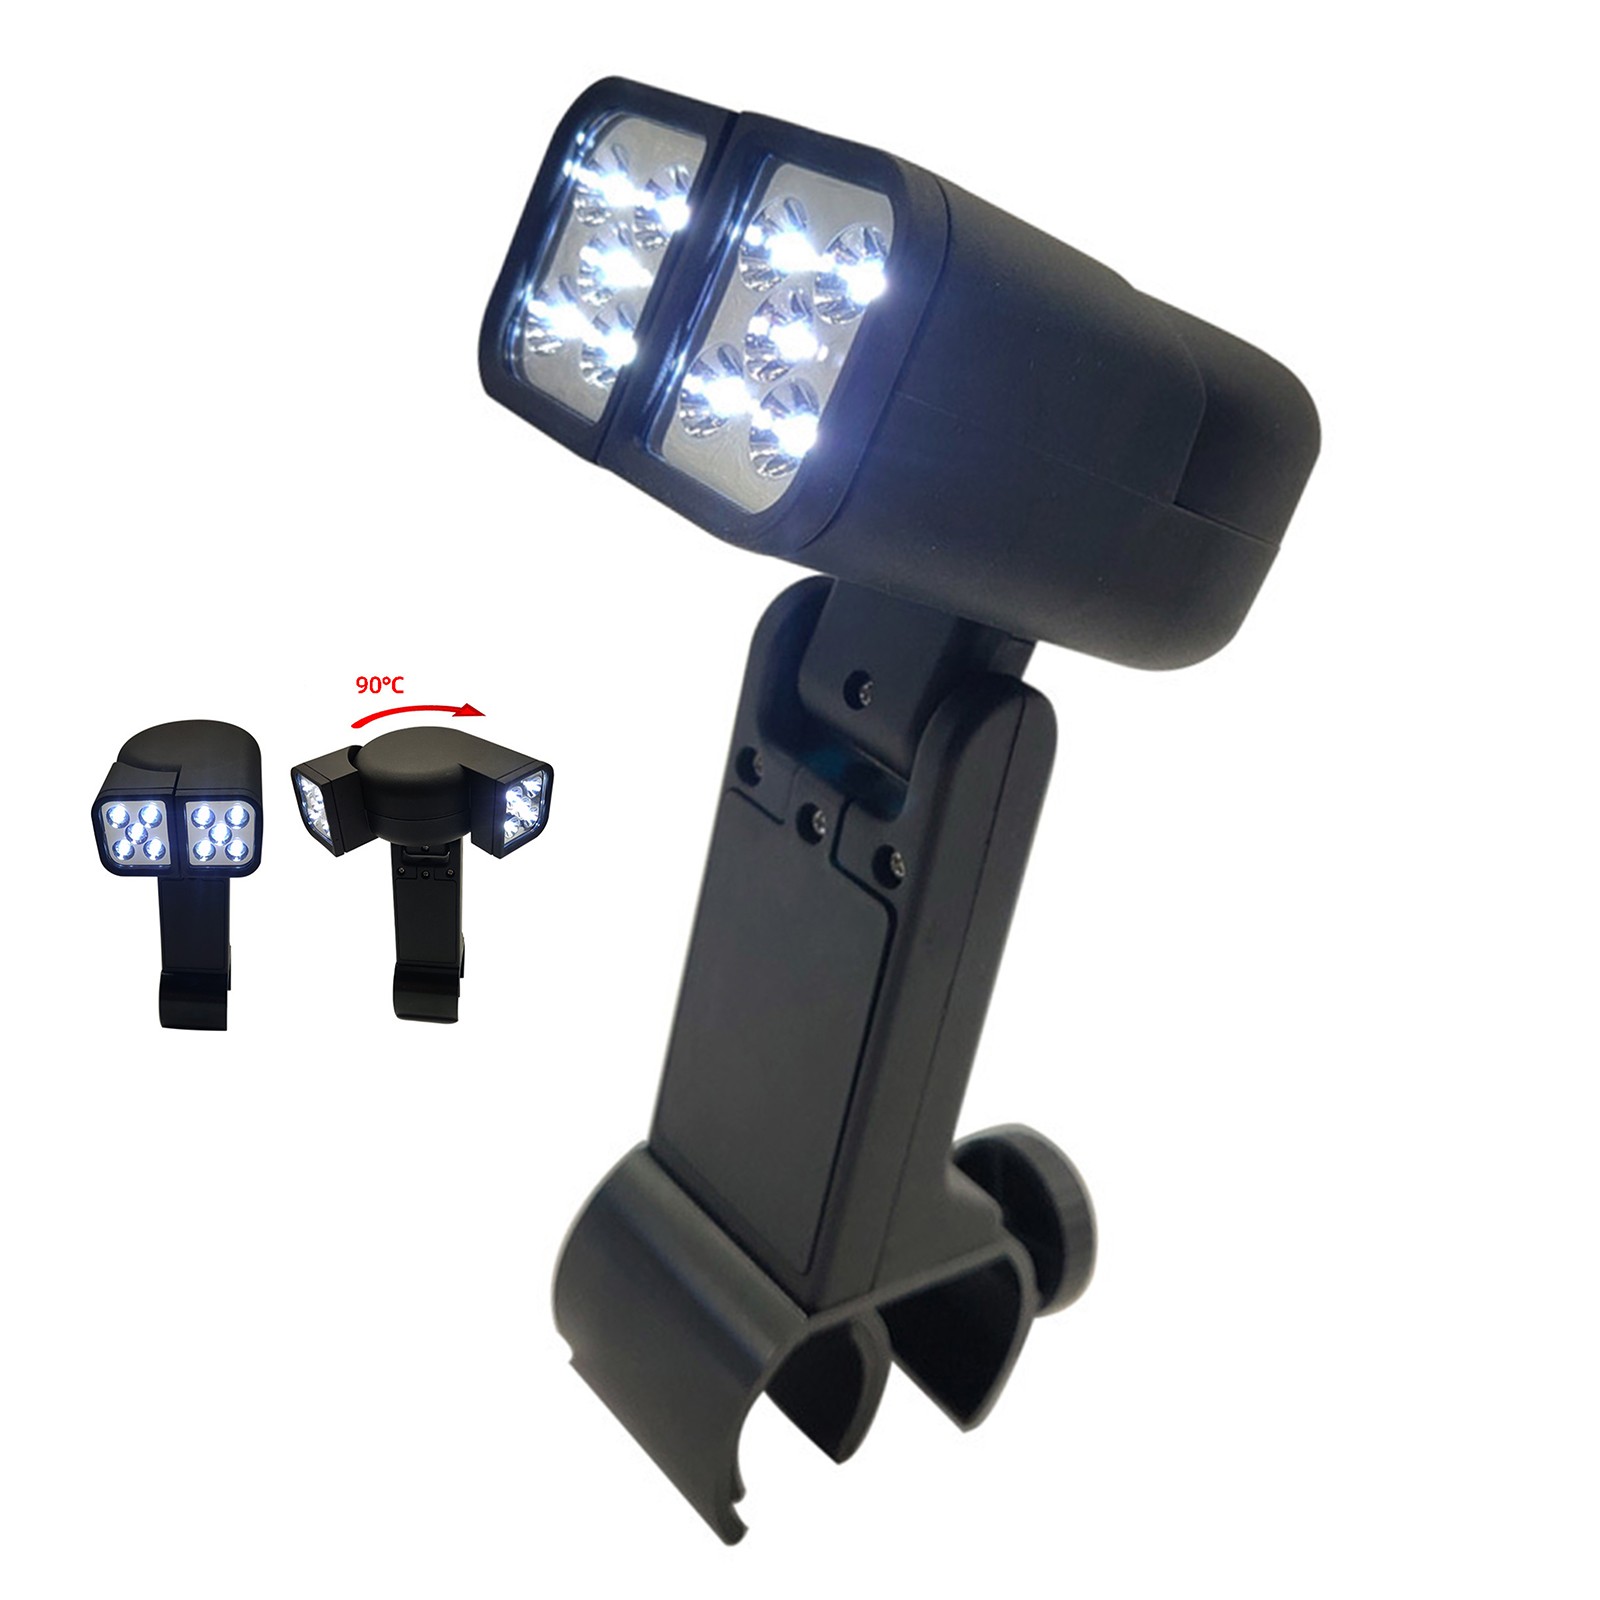 Bbq Grill Light Outdoor Super Bright LED Lamp Base Barbecue with 10 Super Bright - image 1 of 4